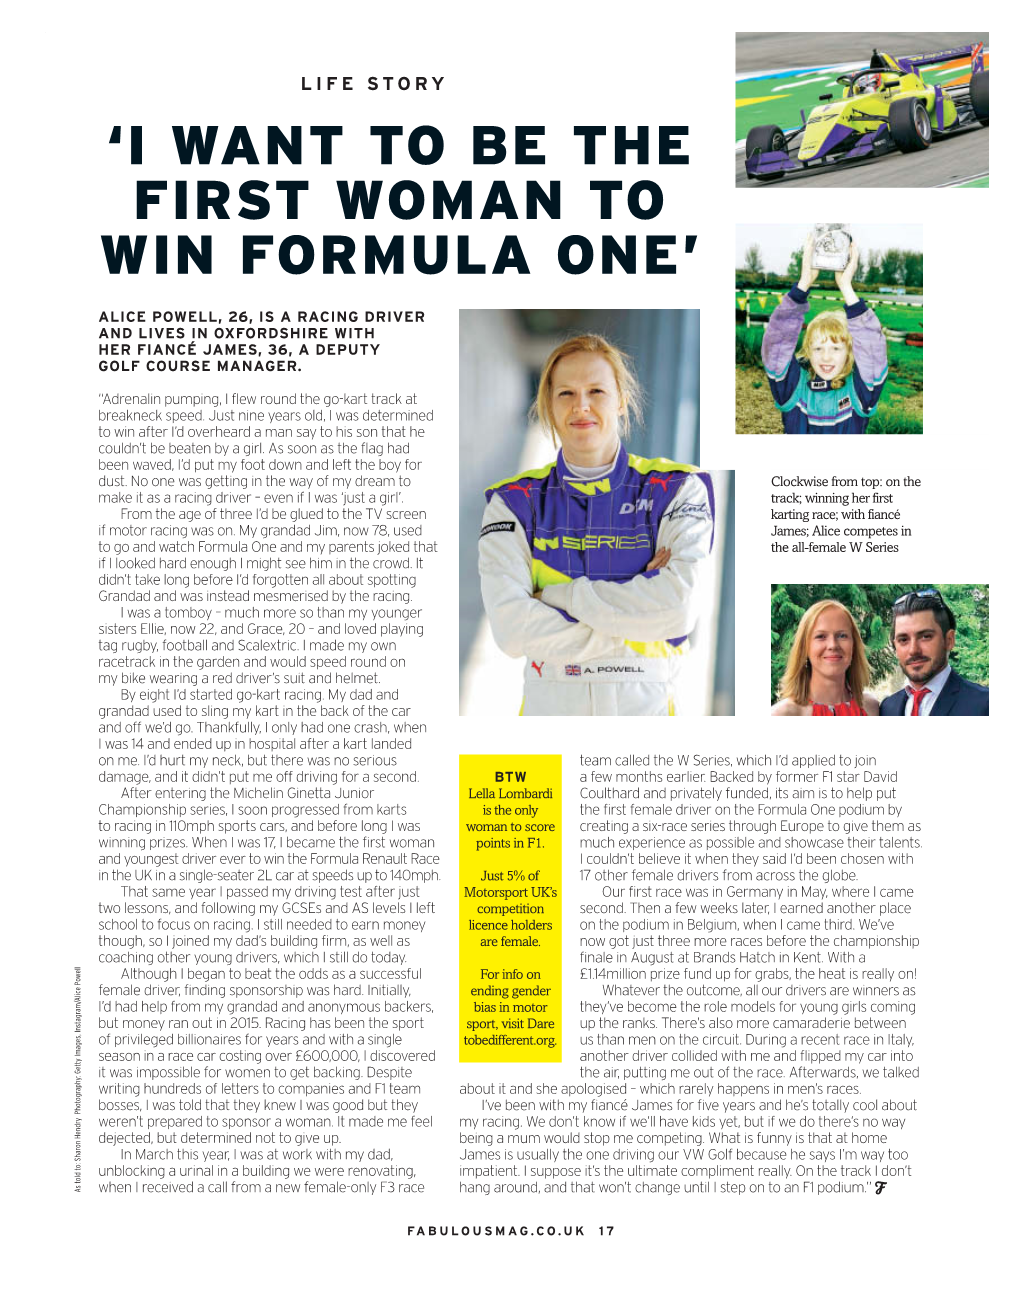 'I Want to Be the First Woman to Win Formula One'